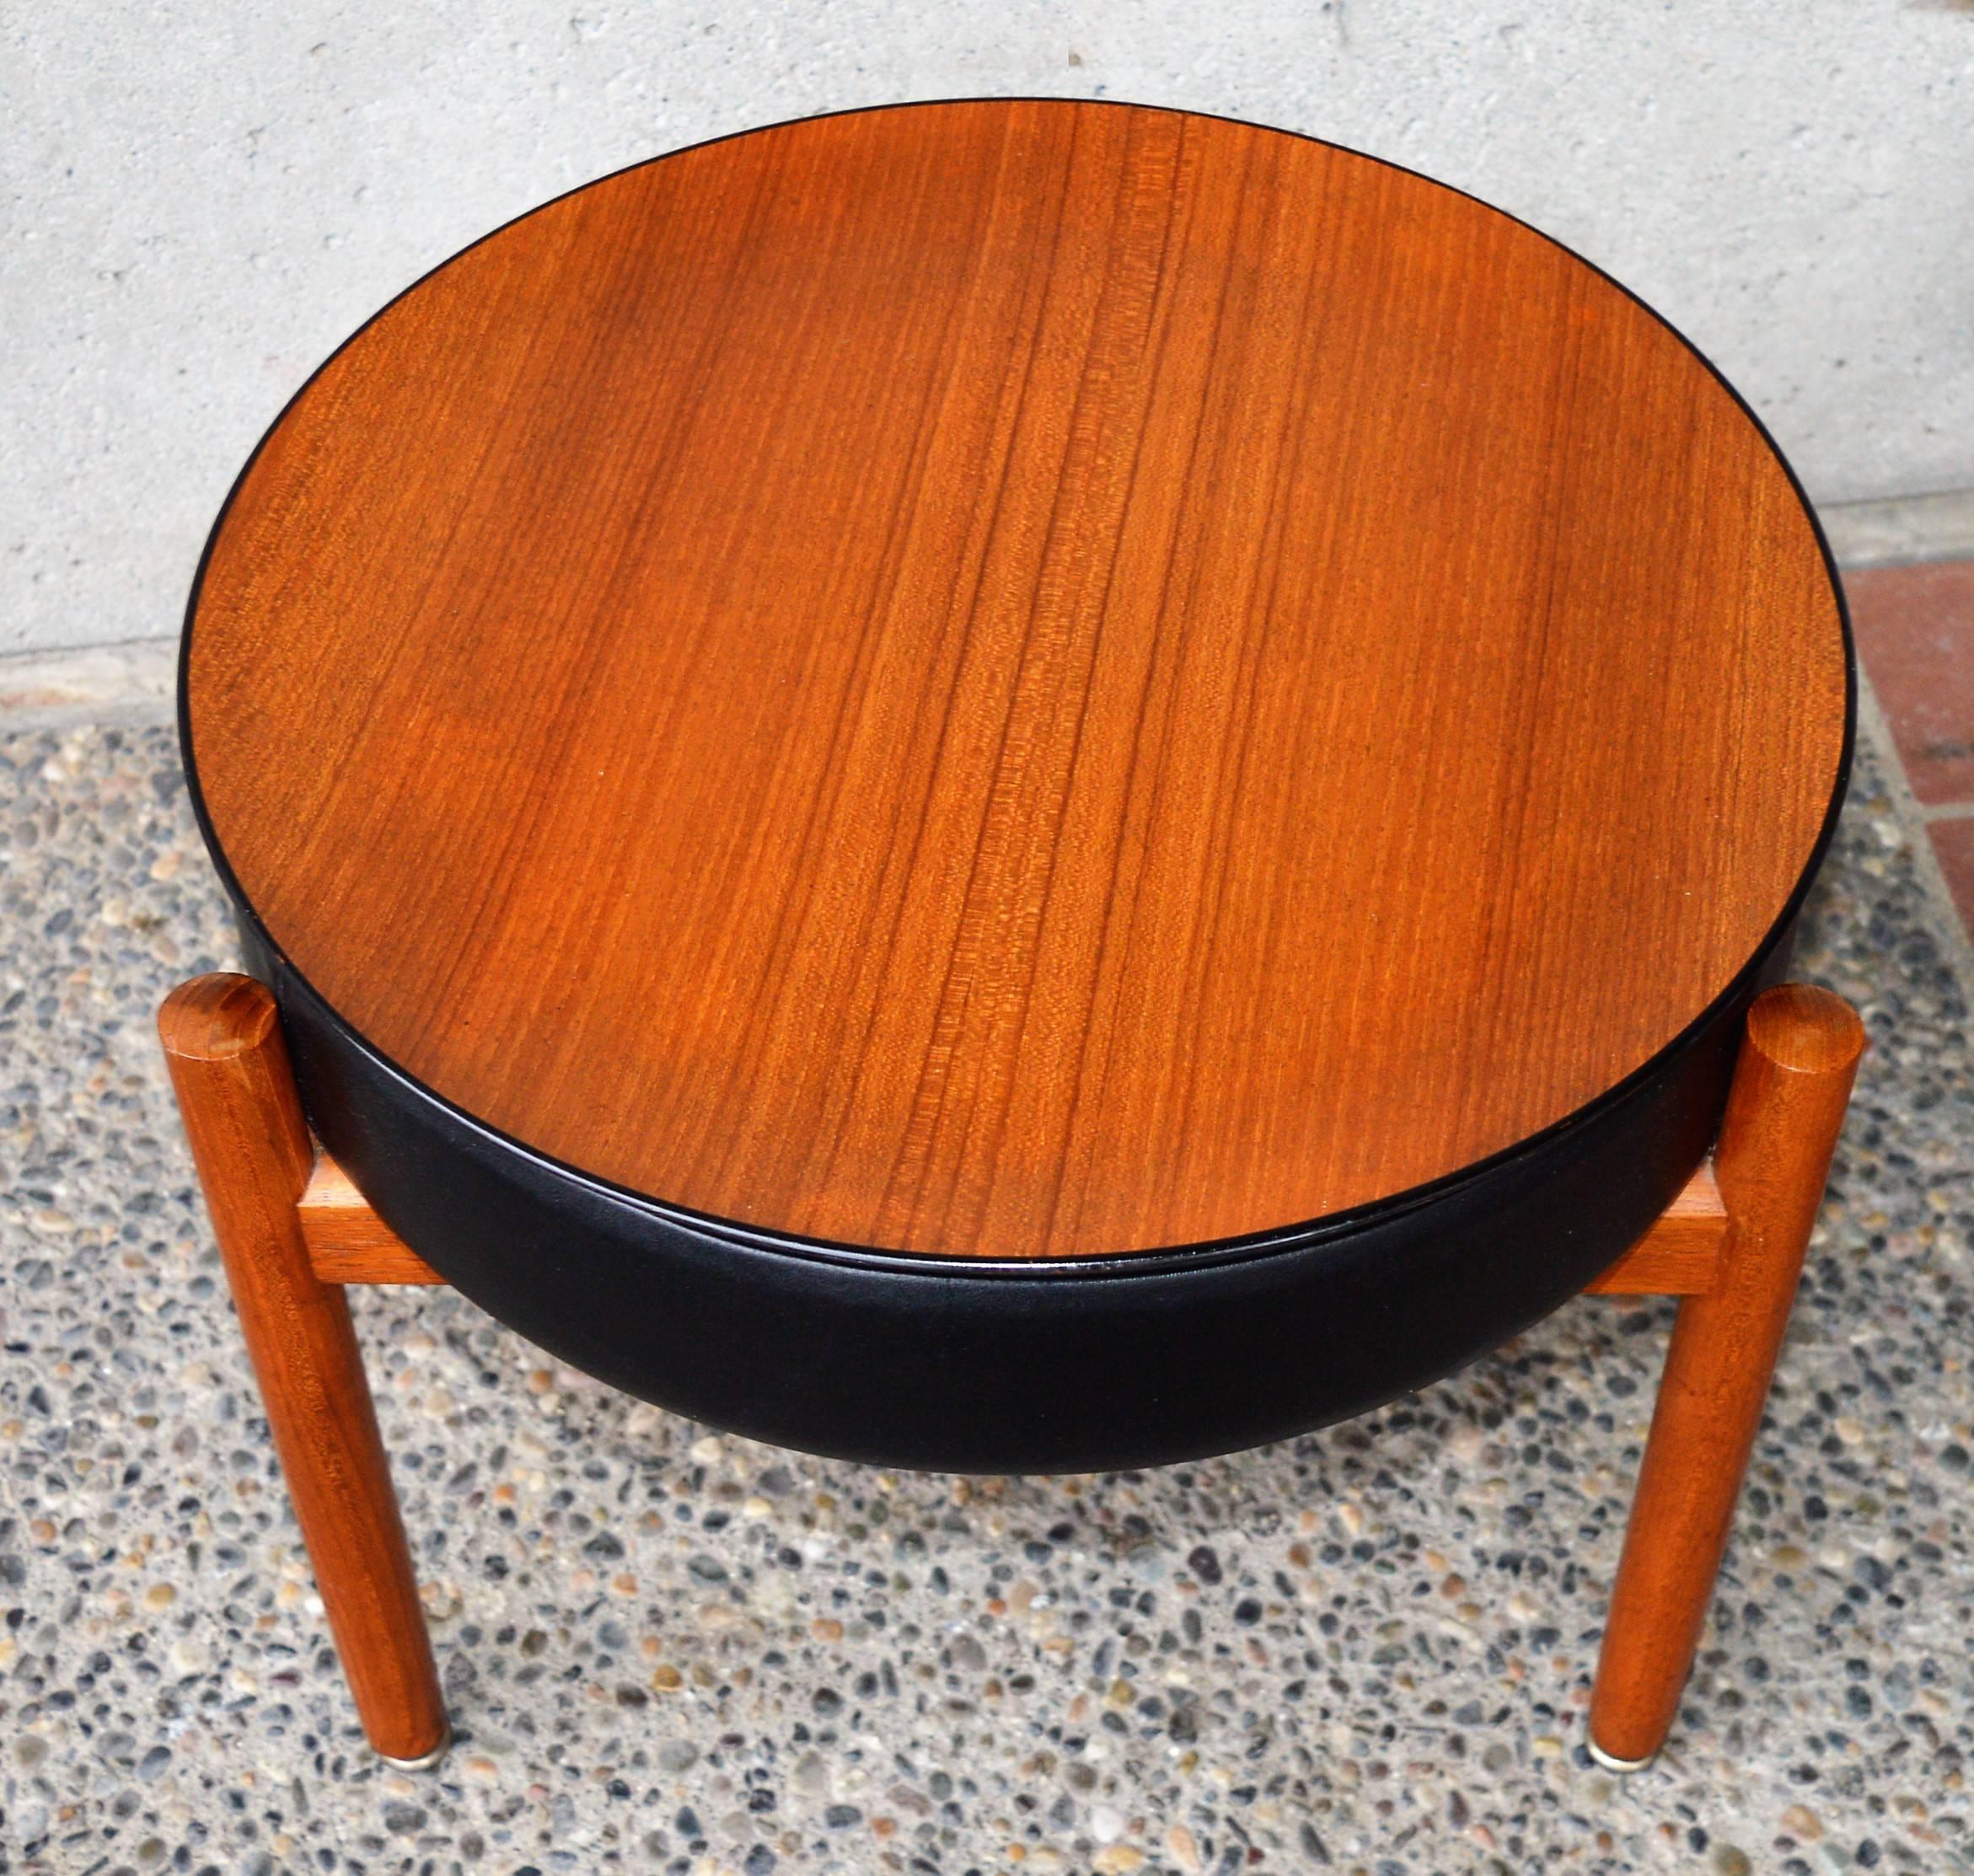 This lovely and practical Danish modern teak stool or ottoman was designed by Hugo Frandsen for Spottrup in the 1960s. We've added the perfect bent ply teak round tray to serve as a tabletop to make it even more practical! The three legged solid